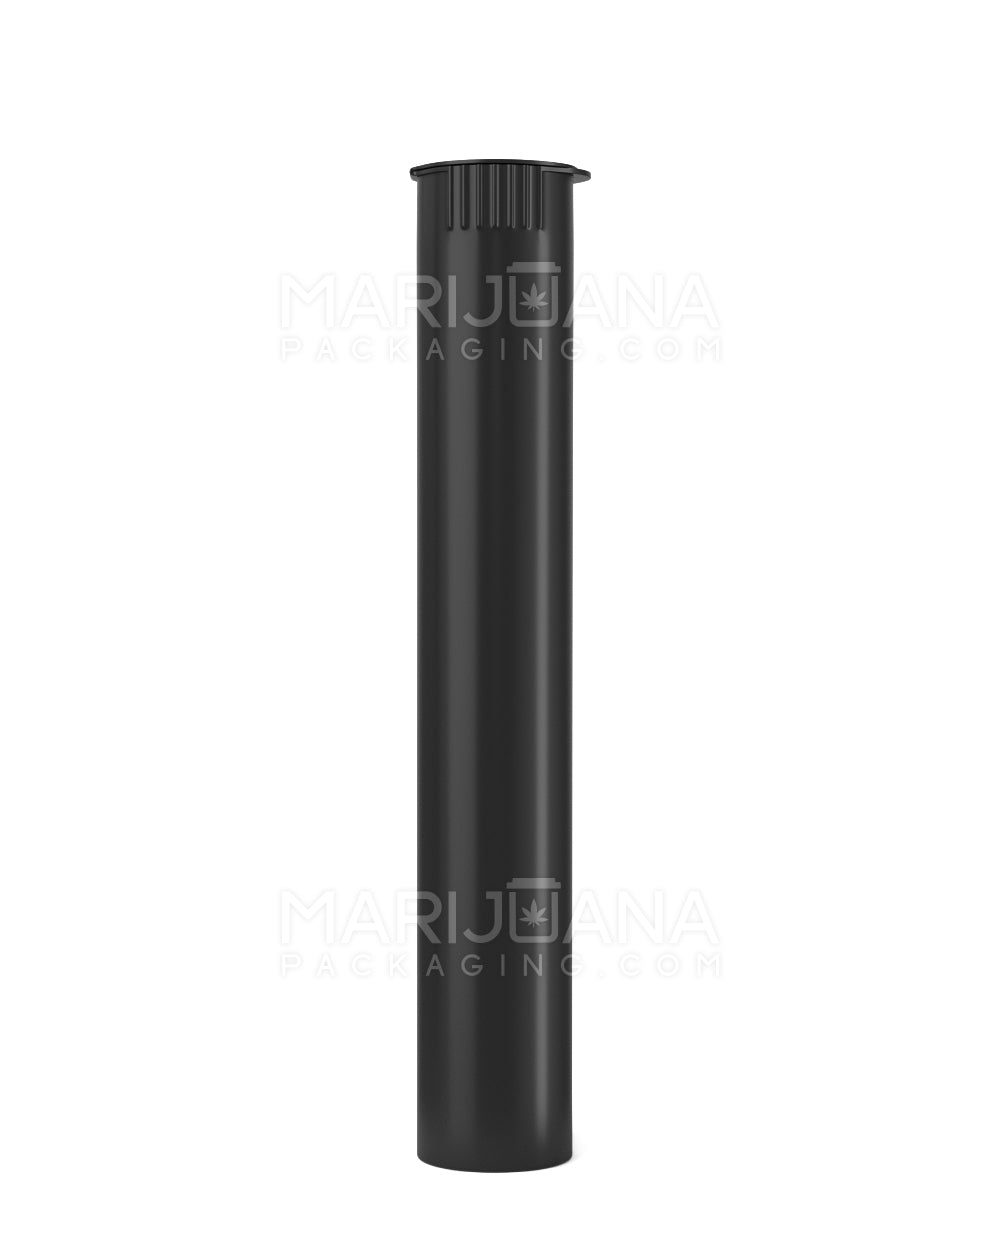 W Gallery 100 Black 116mm Tubes Pop Top Joint is Open Smell-Proof Pre-Roll  Blunt J Oil-Cartridge BPA-Free Plastic Container Holder Vial fits RAW Cones  110mm 109mm King Lean 98 Special 120mm